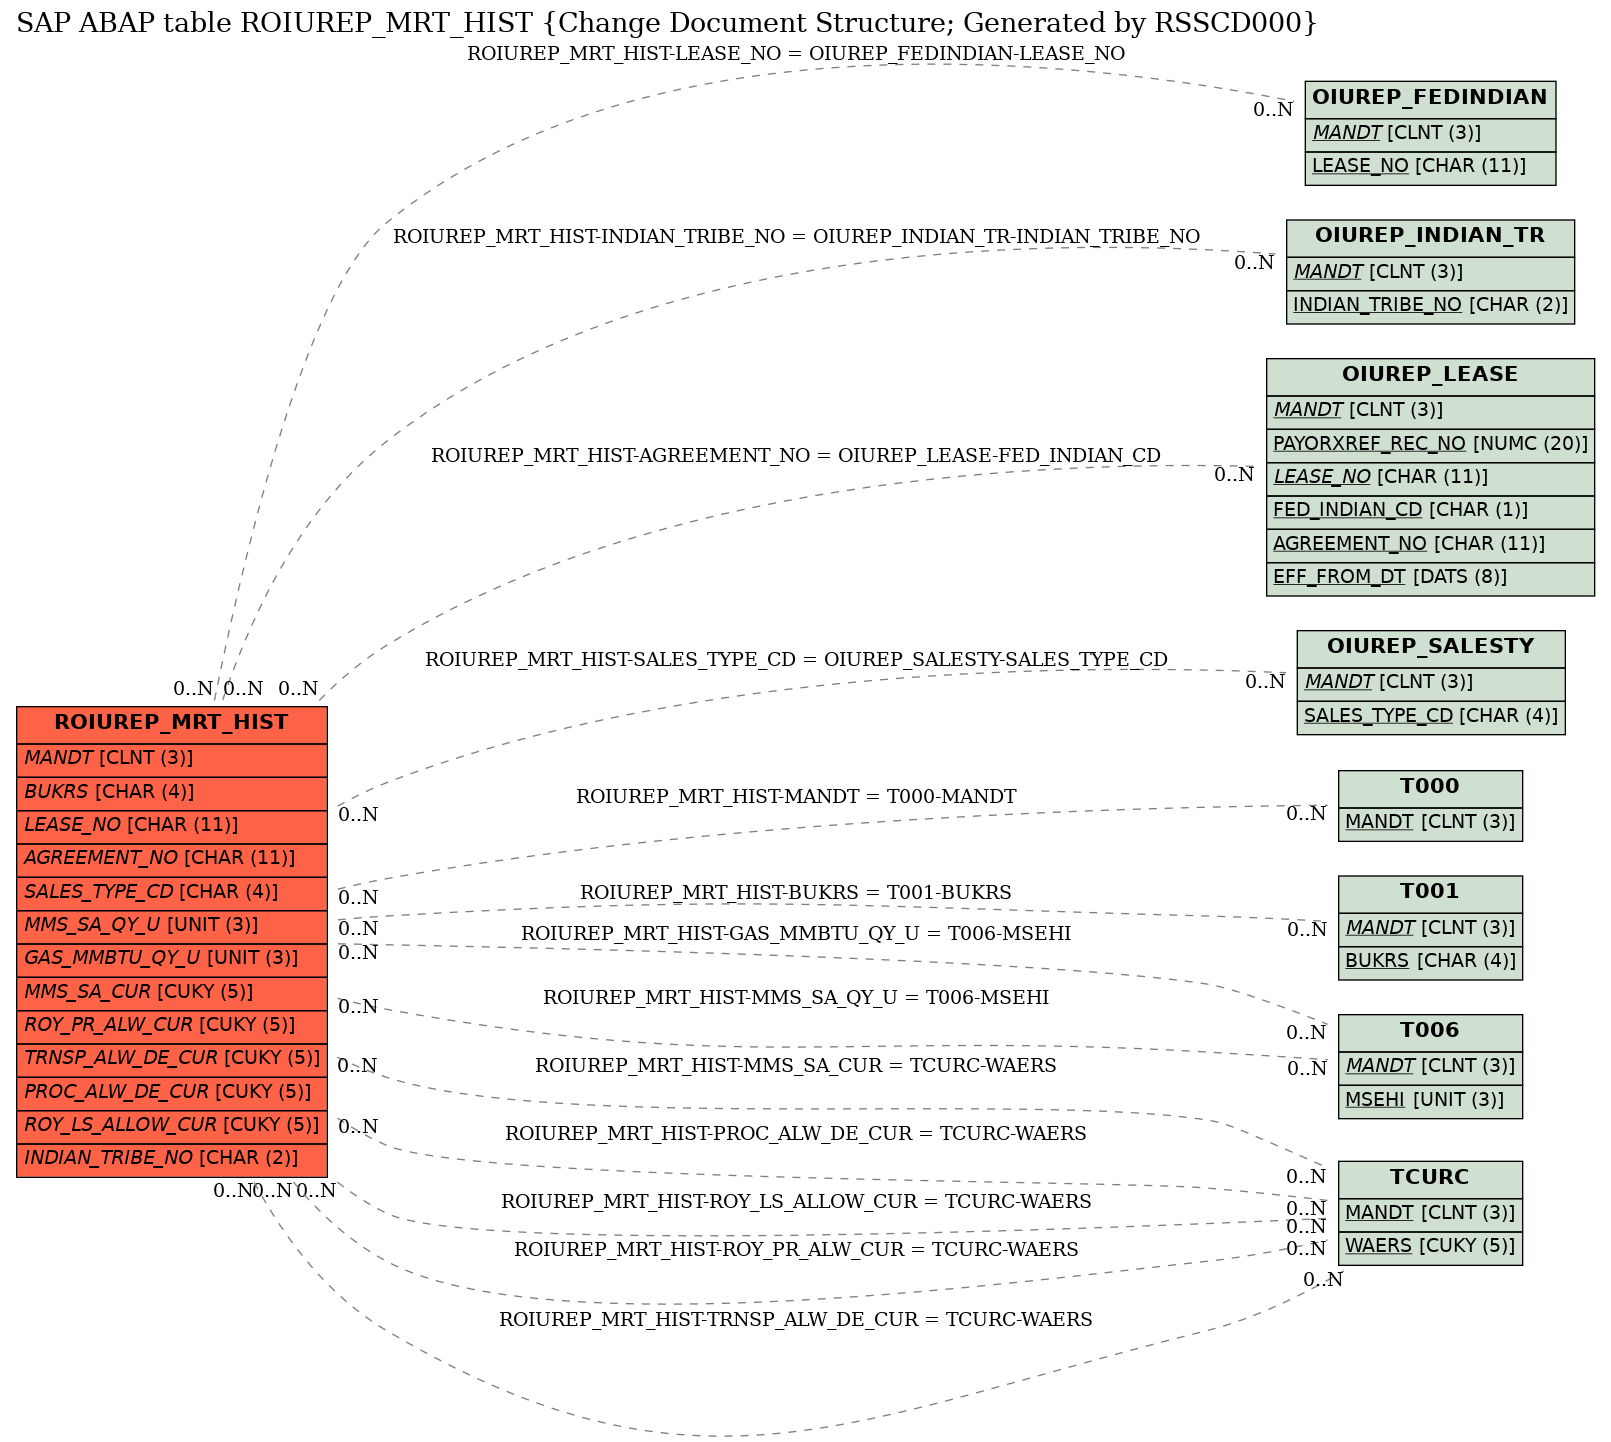 E-R Diagram for table ROIUREP_MRT_HIST (Change Document Structure; Generated by RSSCD000)